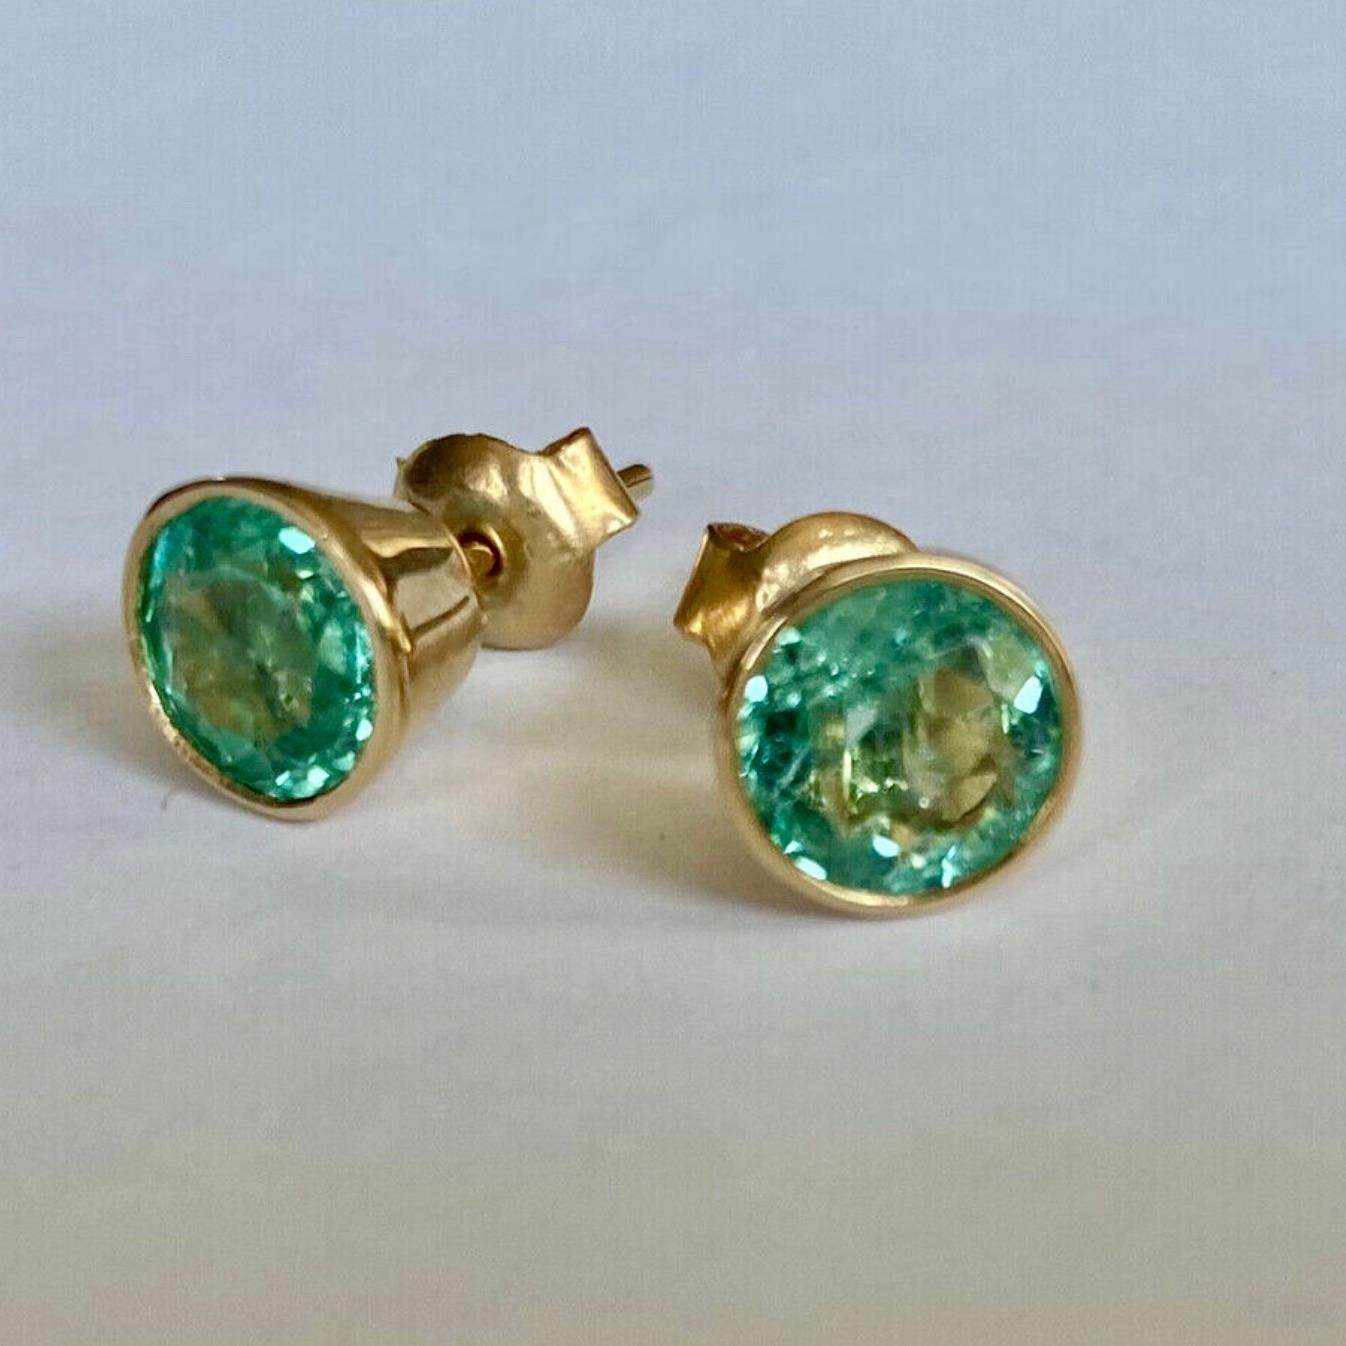 
Stylish and Classic Colombian Emerald Stud Earrings Round Cut Total Weight 2.00 Carats. Natural Colombian Medium Green  Color, VS in Clarity!
Made of Solid 18K Yellow Gold 2.0g, Push Backs
Bezel Set
Condition: New
